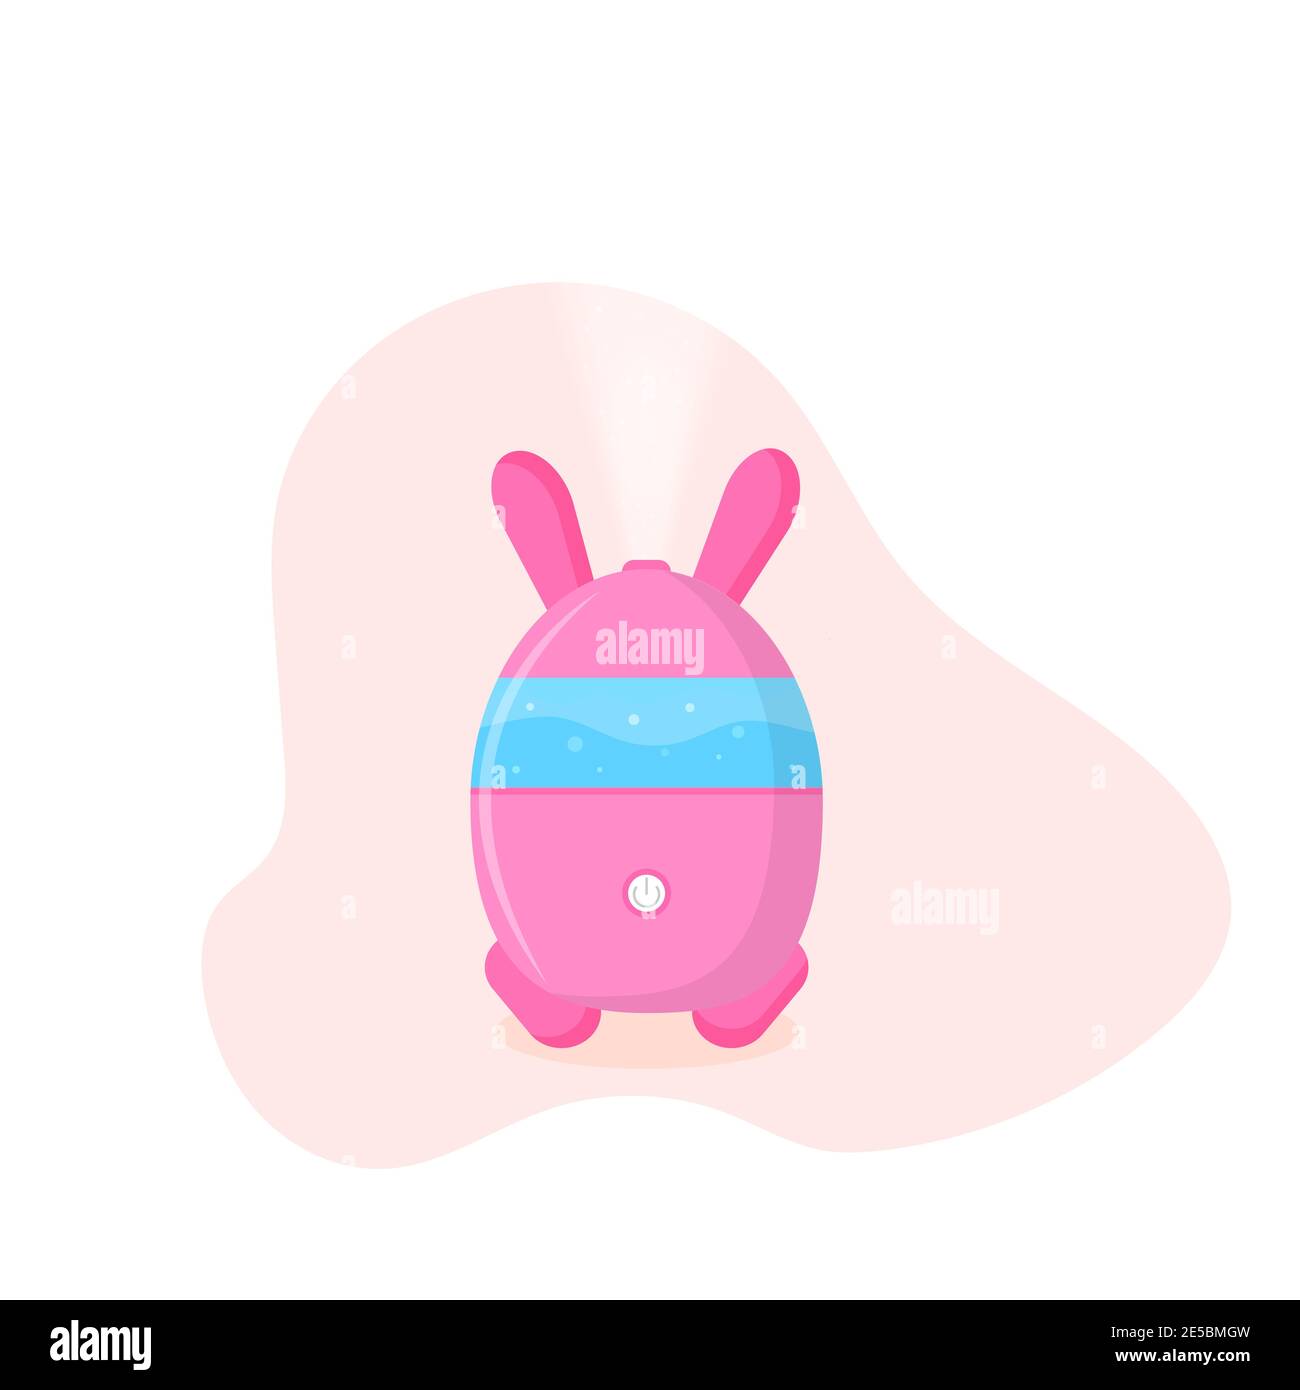 Humidifier in the shape of a rabbit. Air freshener for home or office. Modern vector illustration in flat cartoon style. Stock Vector